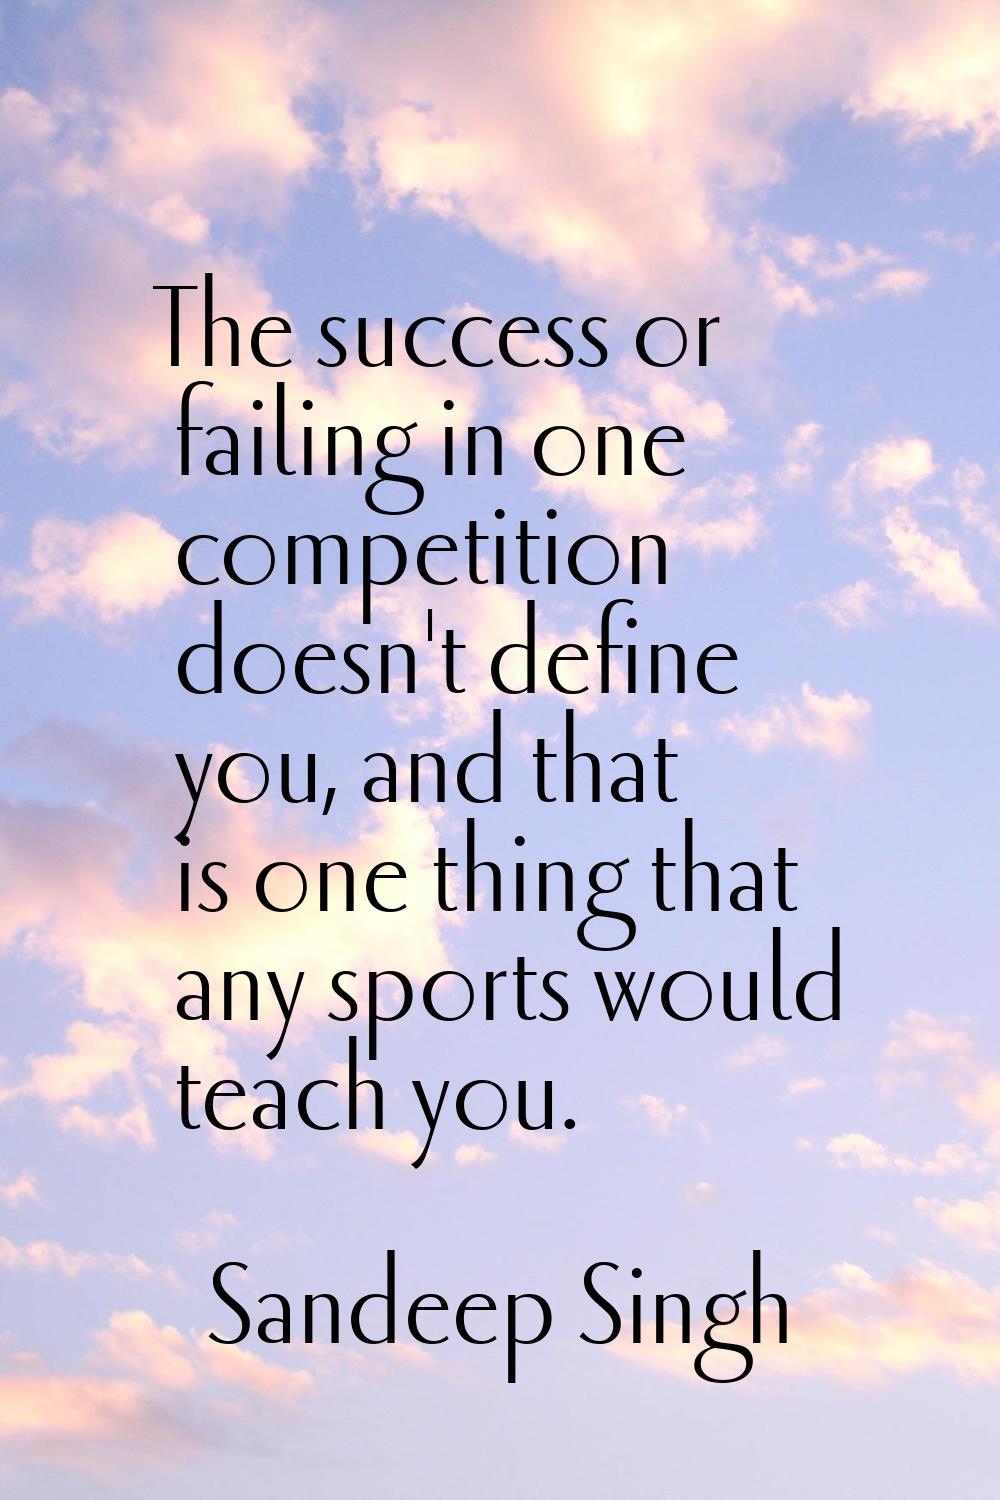 The success or failing in one competition doesn't define you, and that is one thing that any sports